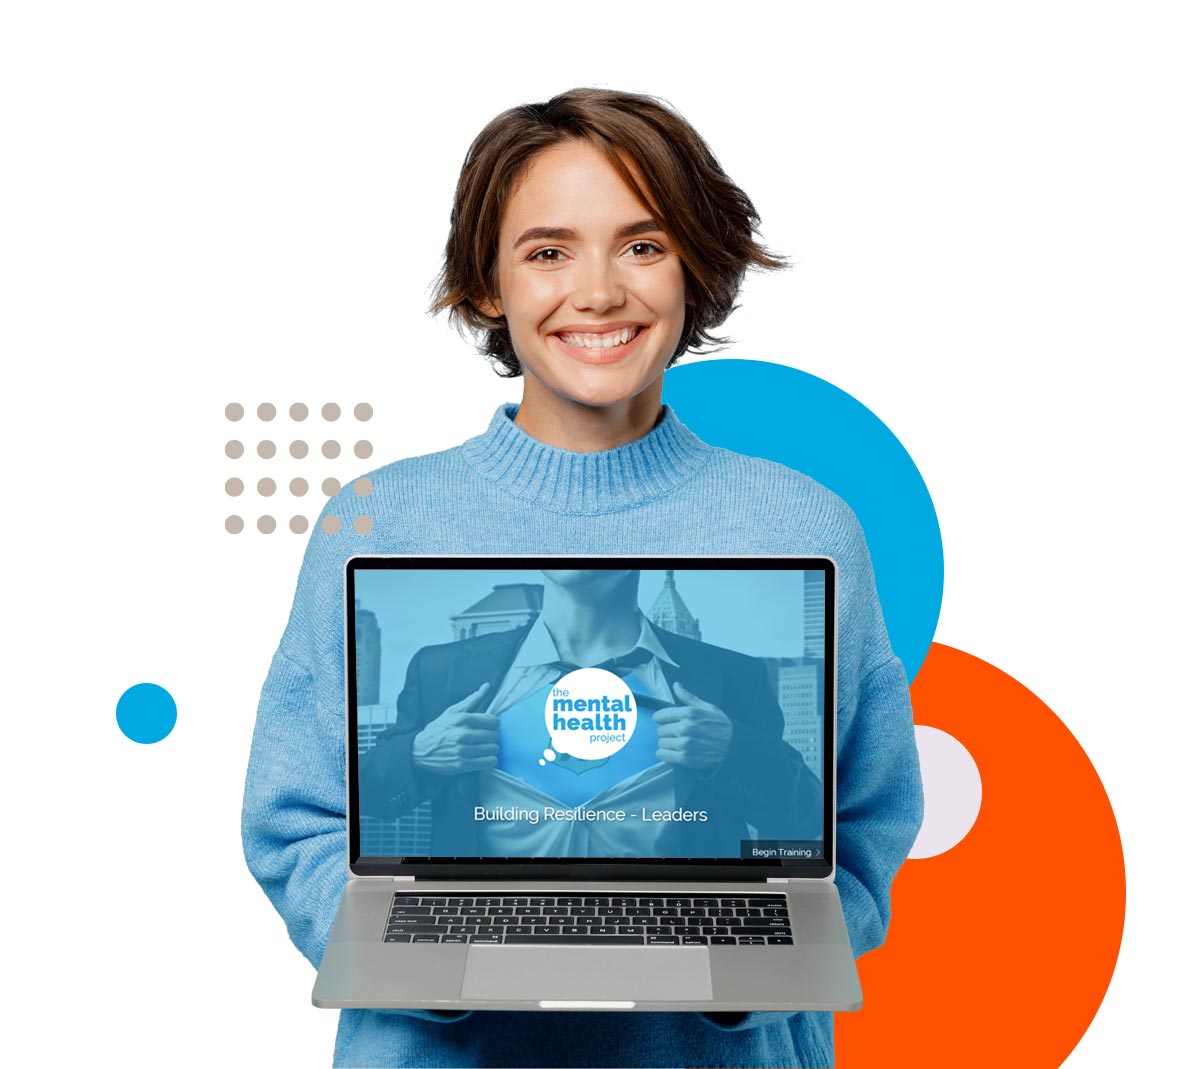 Young female employee holding a laptop showing the Building Resilience eLearning training course welcome screen